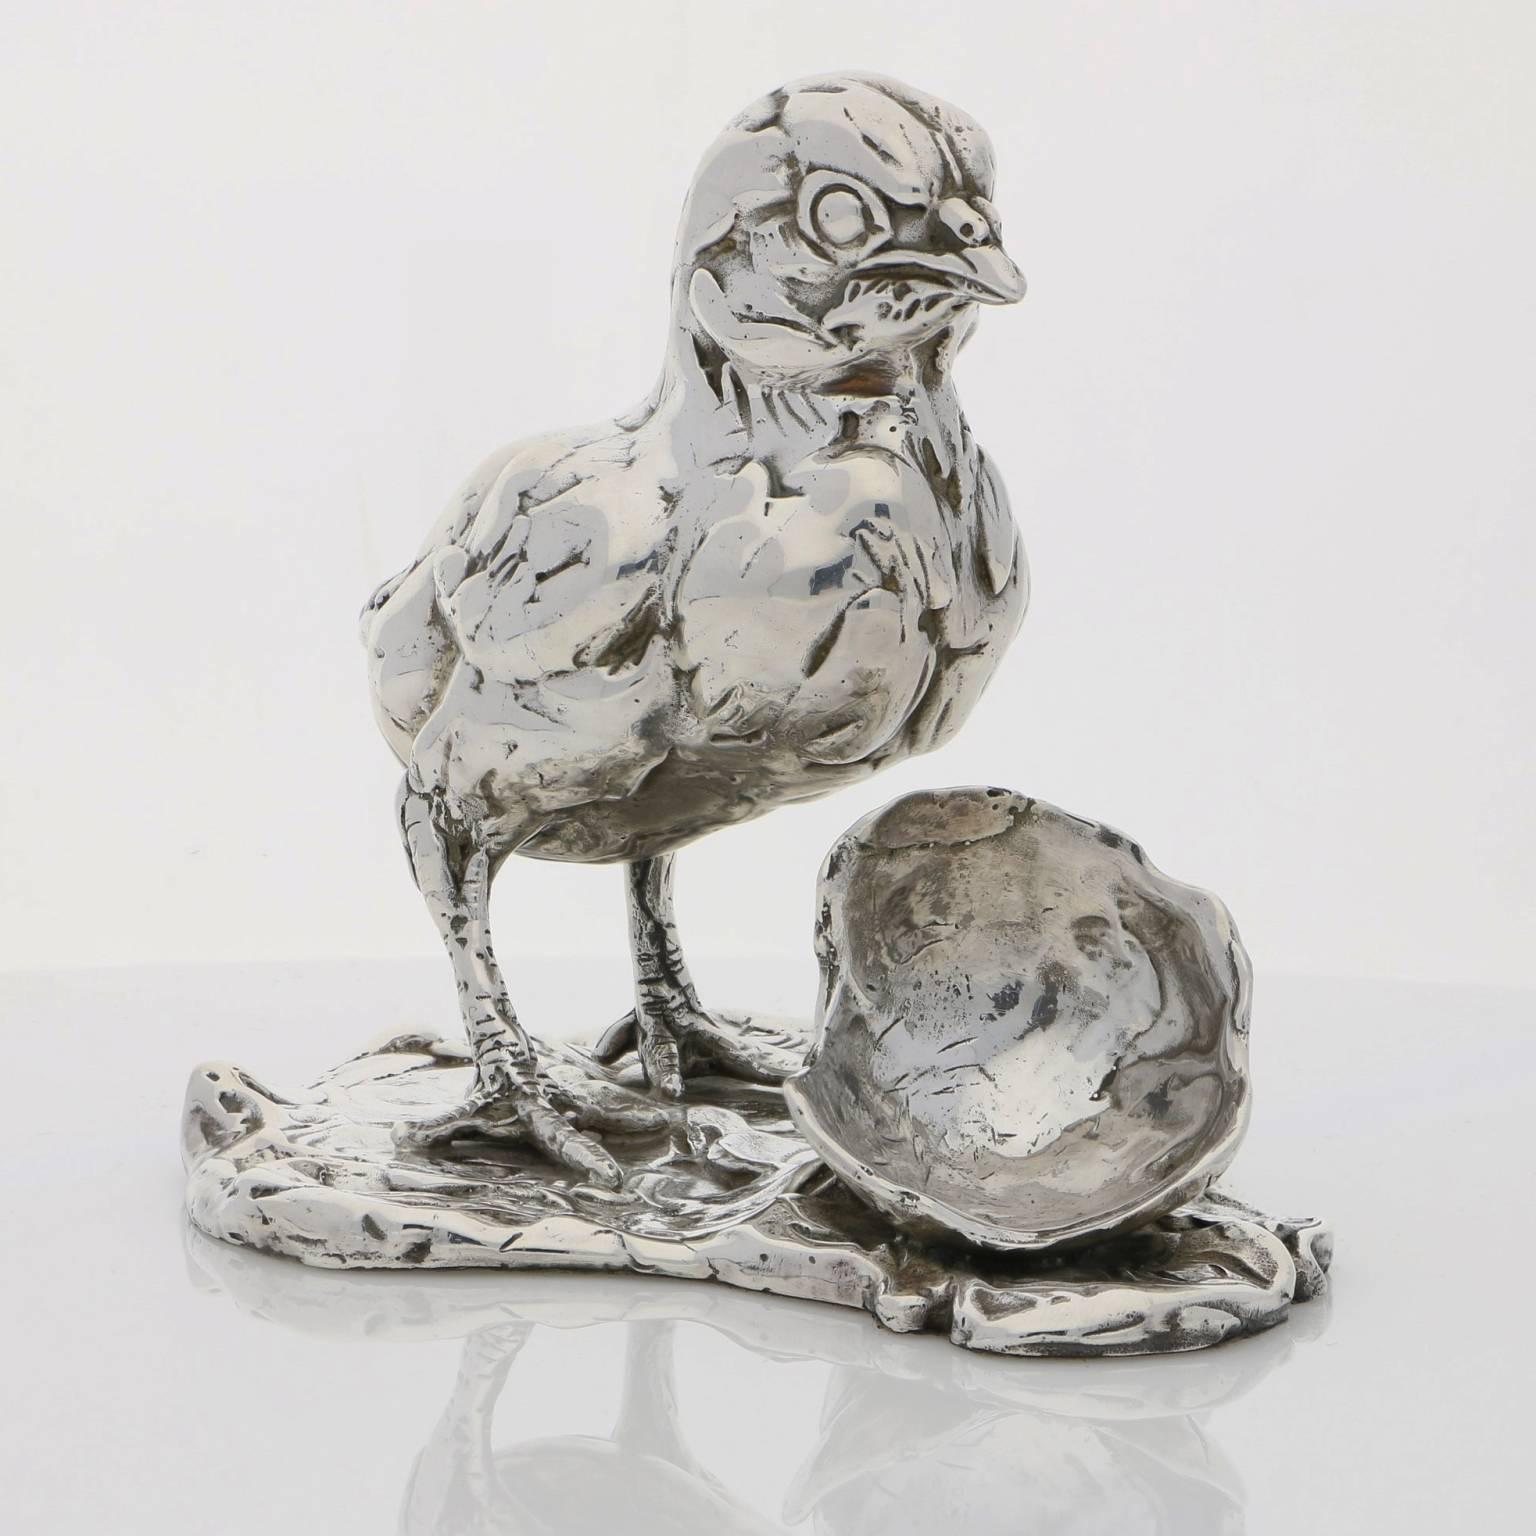 The limited edition finely modelled newly hatched chick stands uncertainly, legs and feet wide, between the pieces of his broken shell.  His eyes are only half open as he blinks and takes in his world for the first time.  He has been sculpted in